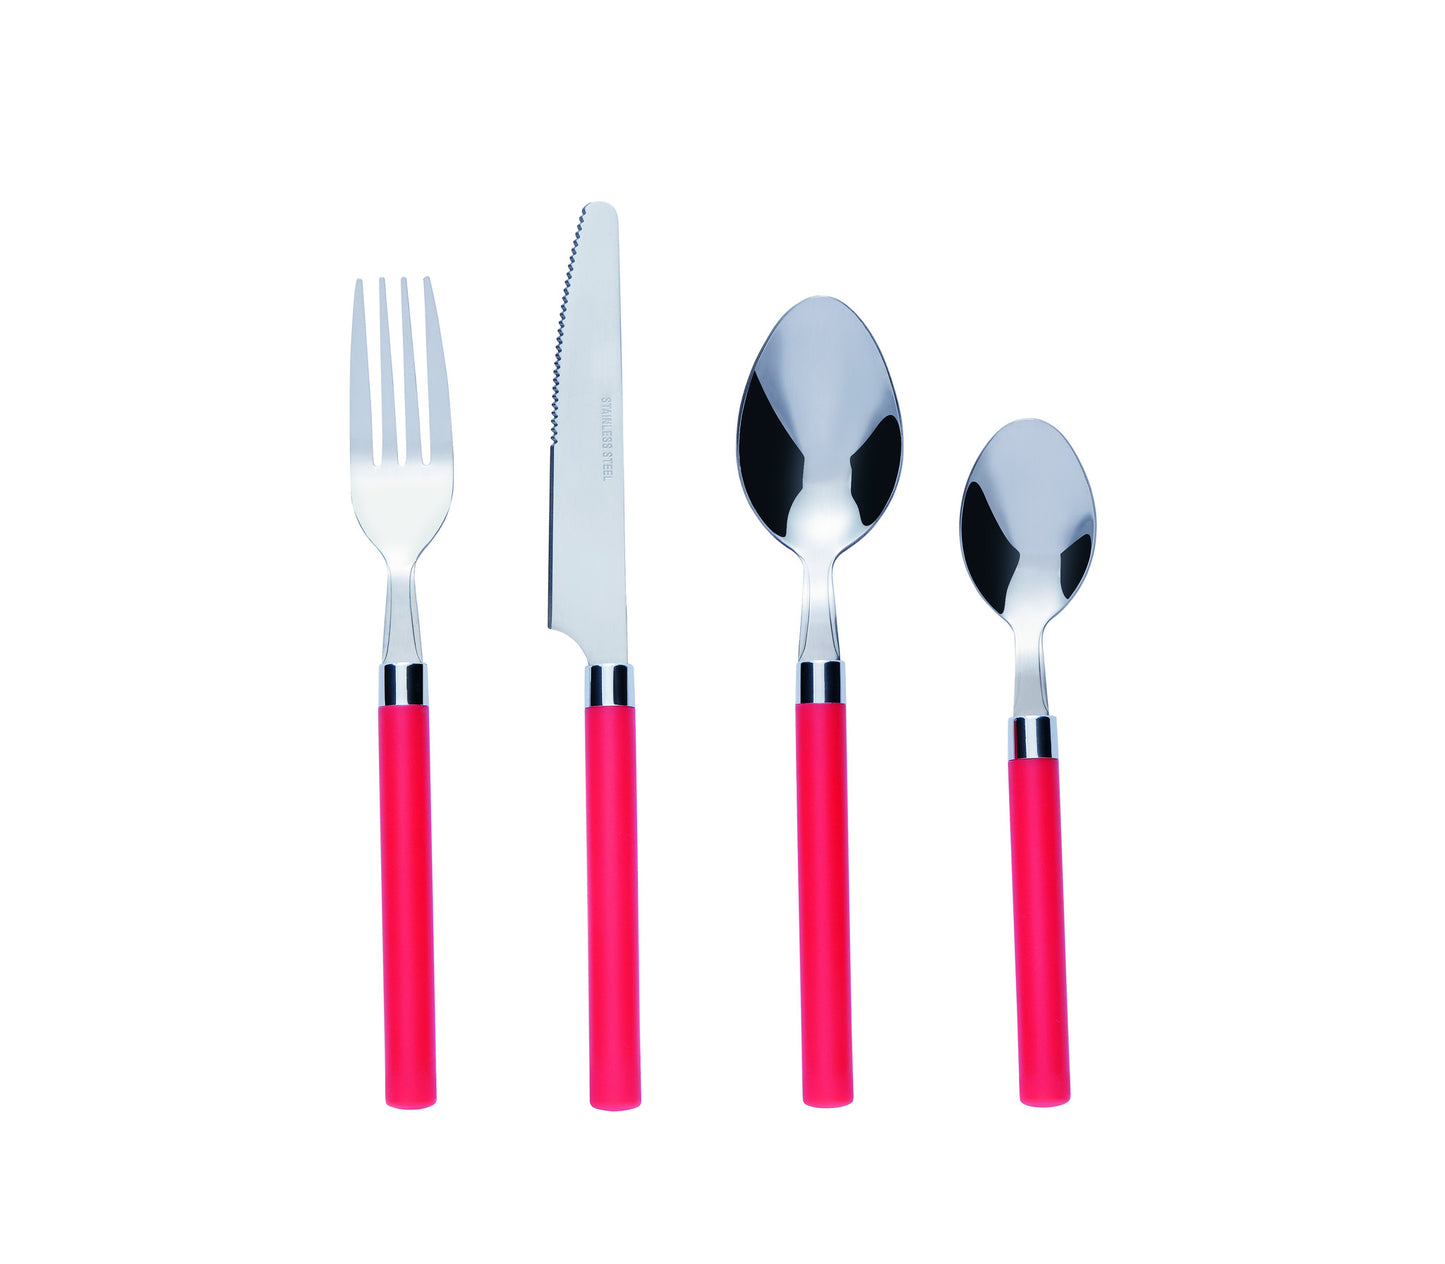 Bon Funnel 16-Piece Stainless Steel Cutlery Set - Red